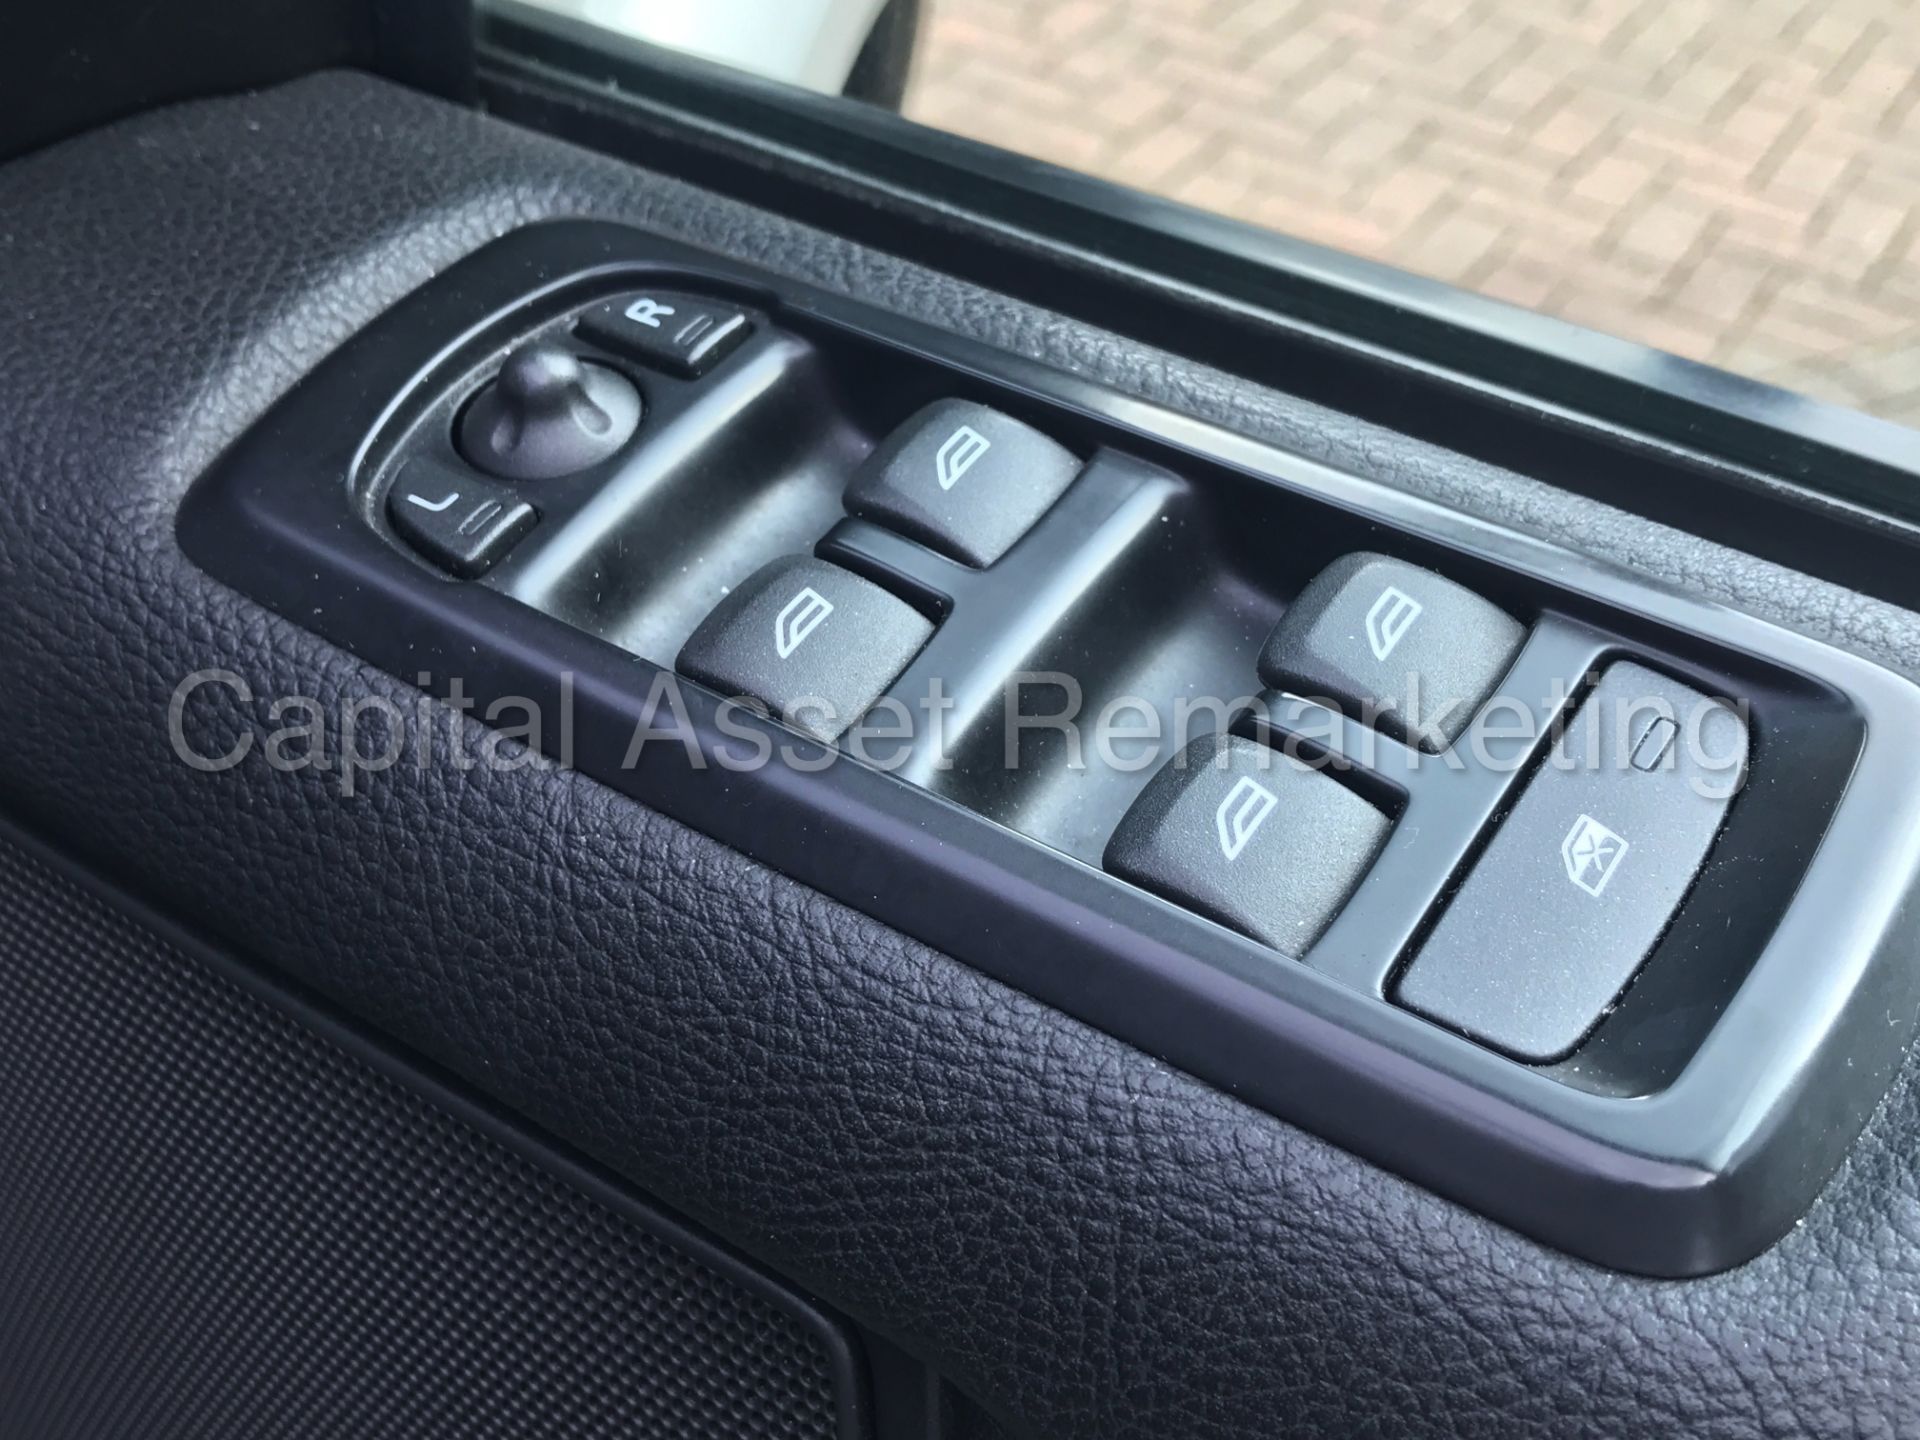 LAND ROVER DISCOVERY 4 (2014 MODEL) '3.0 SDV6 - 8 SPEED AUTO - 7 SEATER' **HUGE SPEC** (1 OWNER) - Image 15 of 30